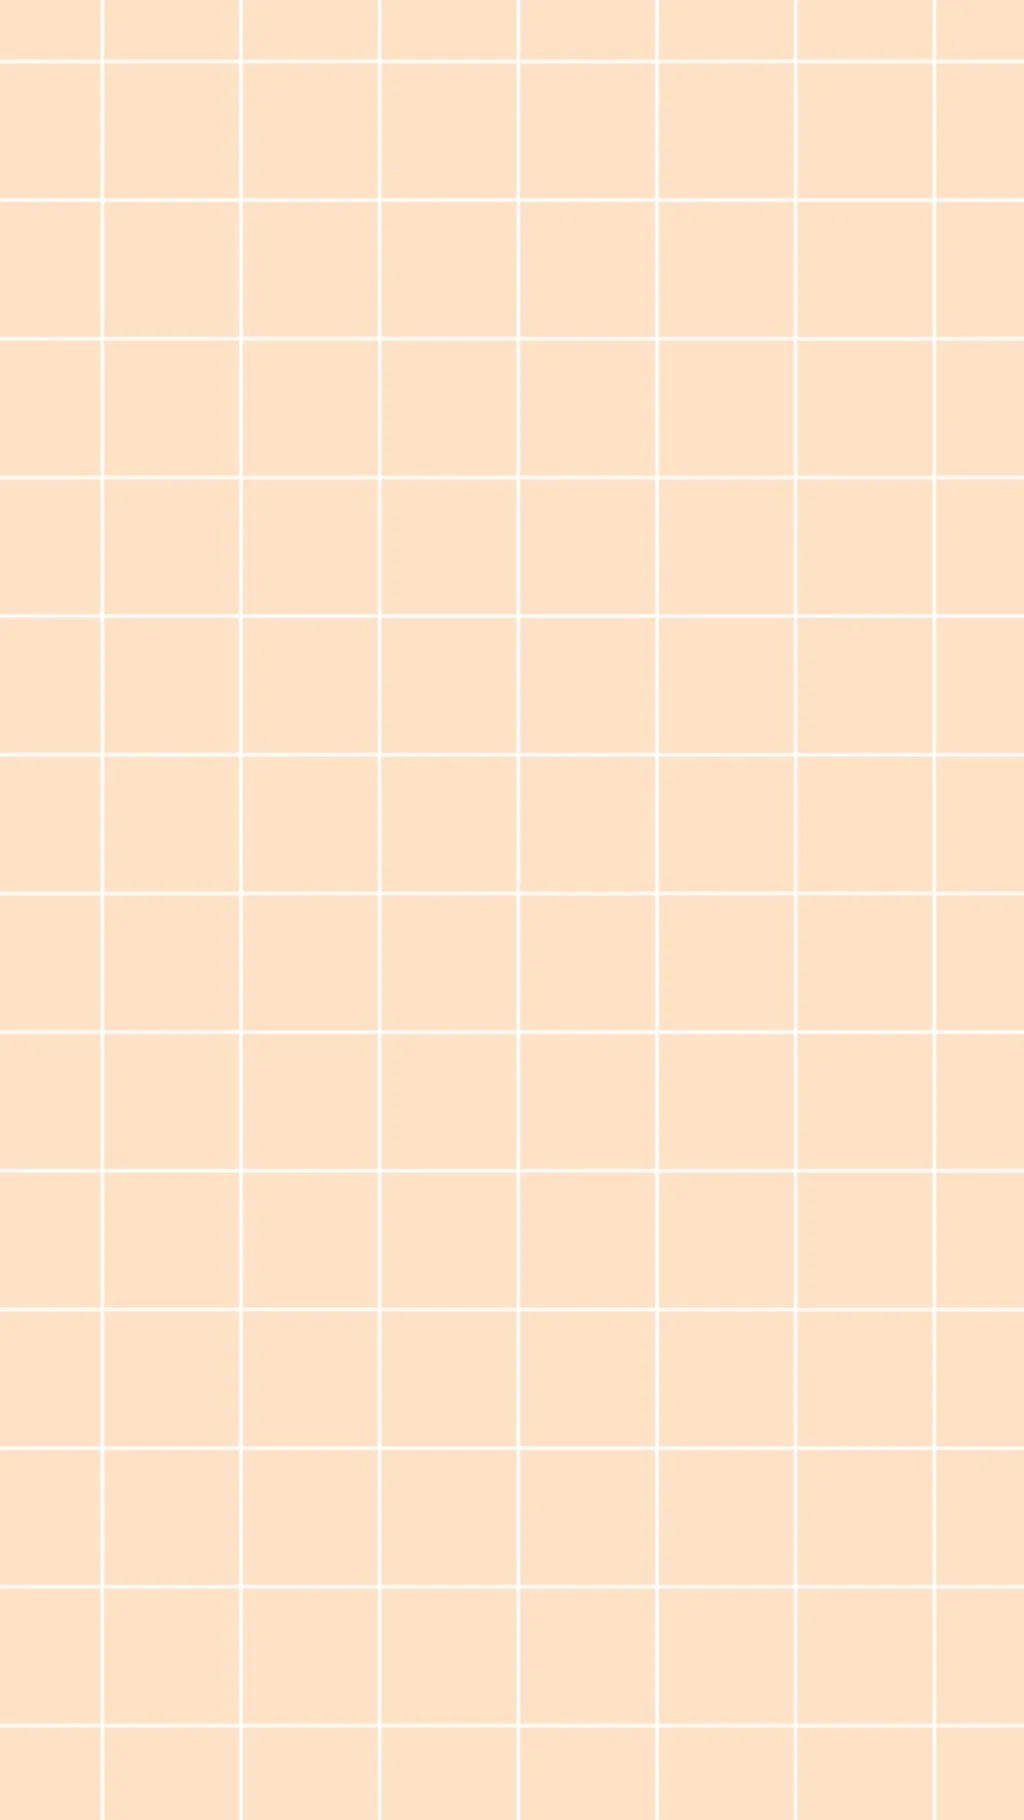 Simple Peach And White Grid Aesthetic Wallpaper